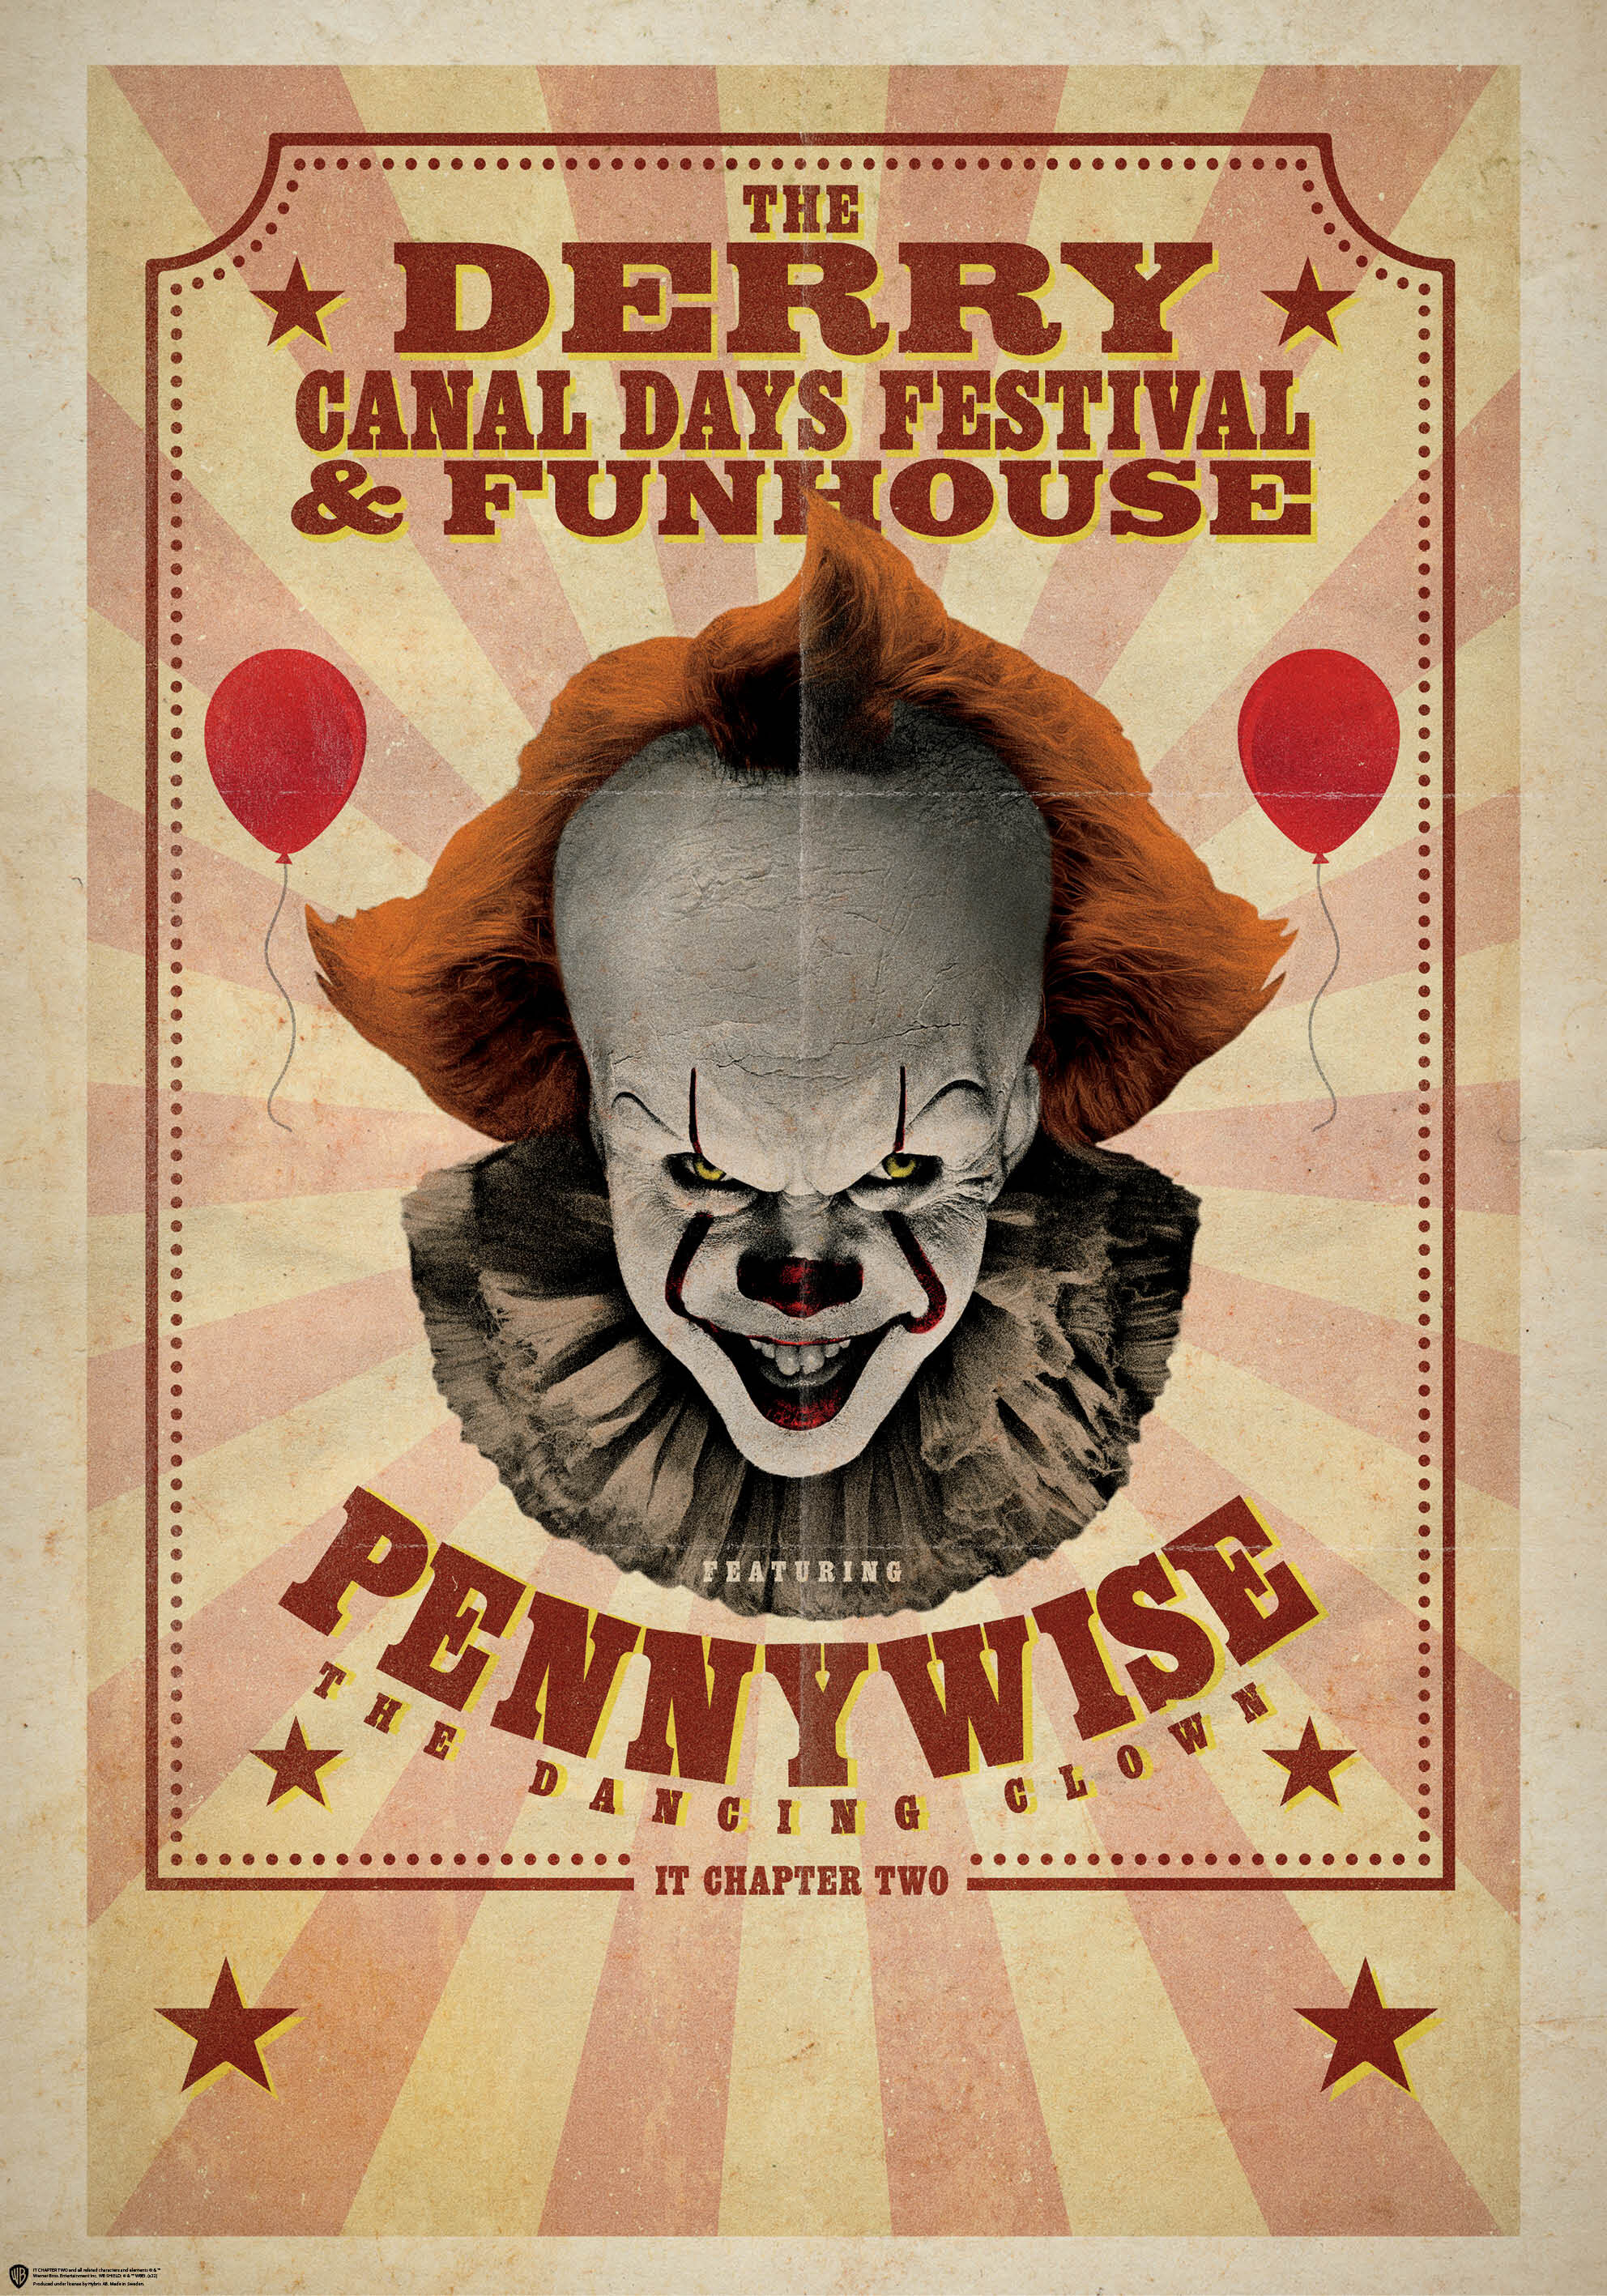 Derry Canal Days Festival Poster